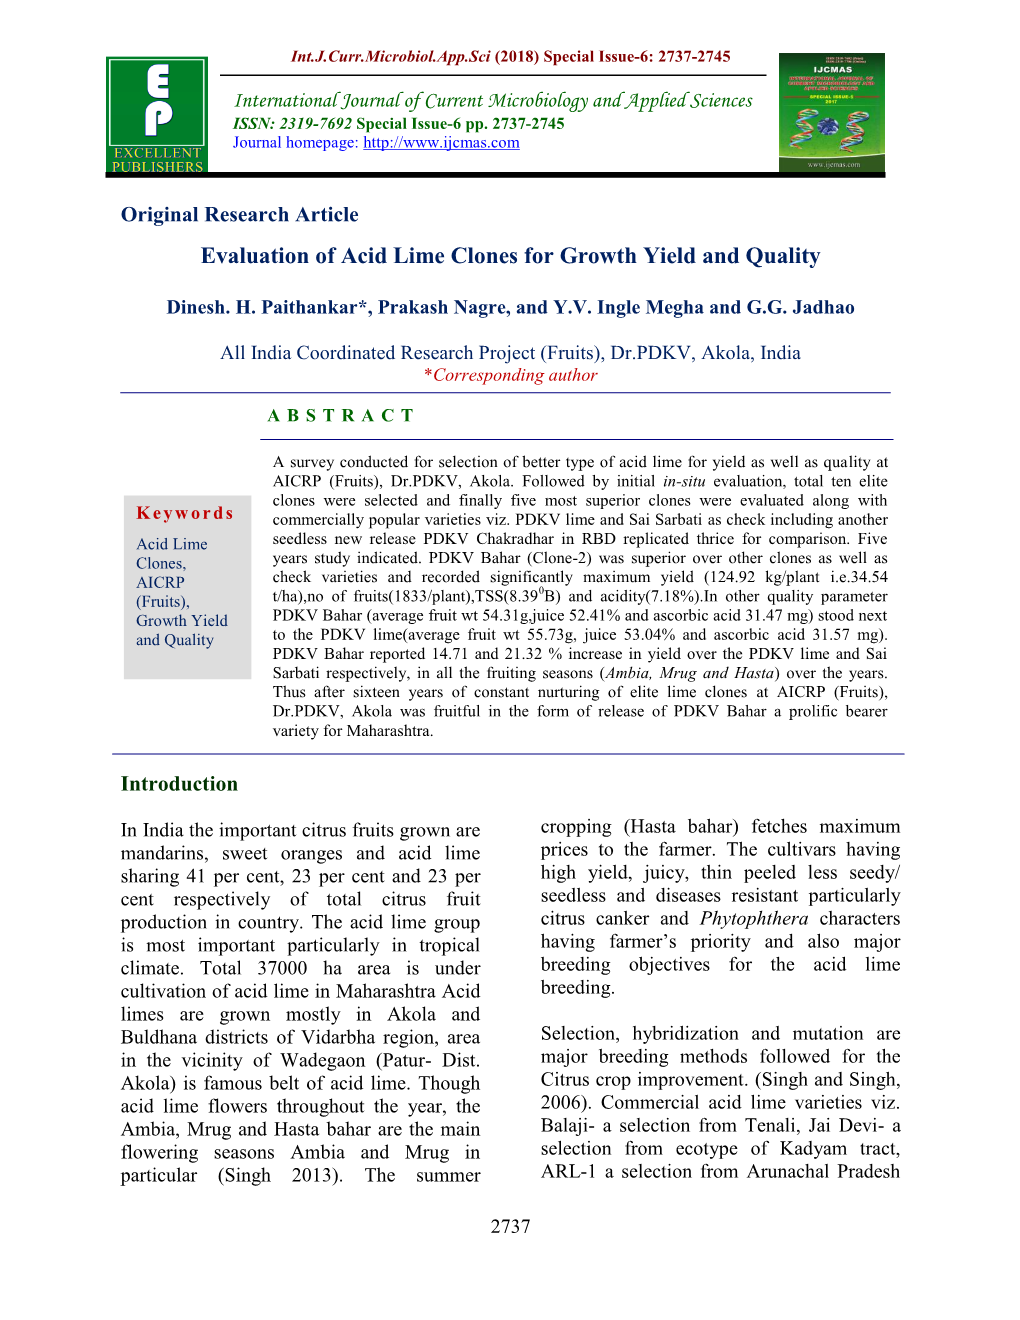 Evaluation of Acid Lime Clones for Growth Yield and Quality